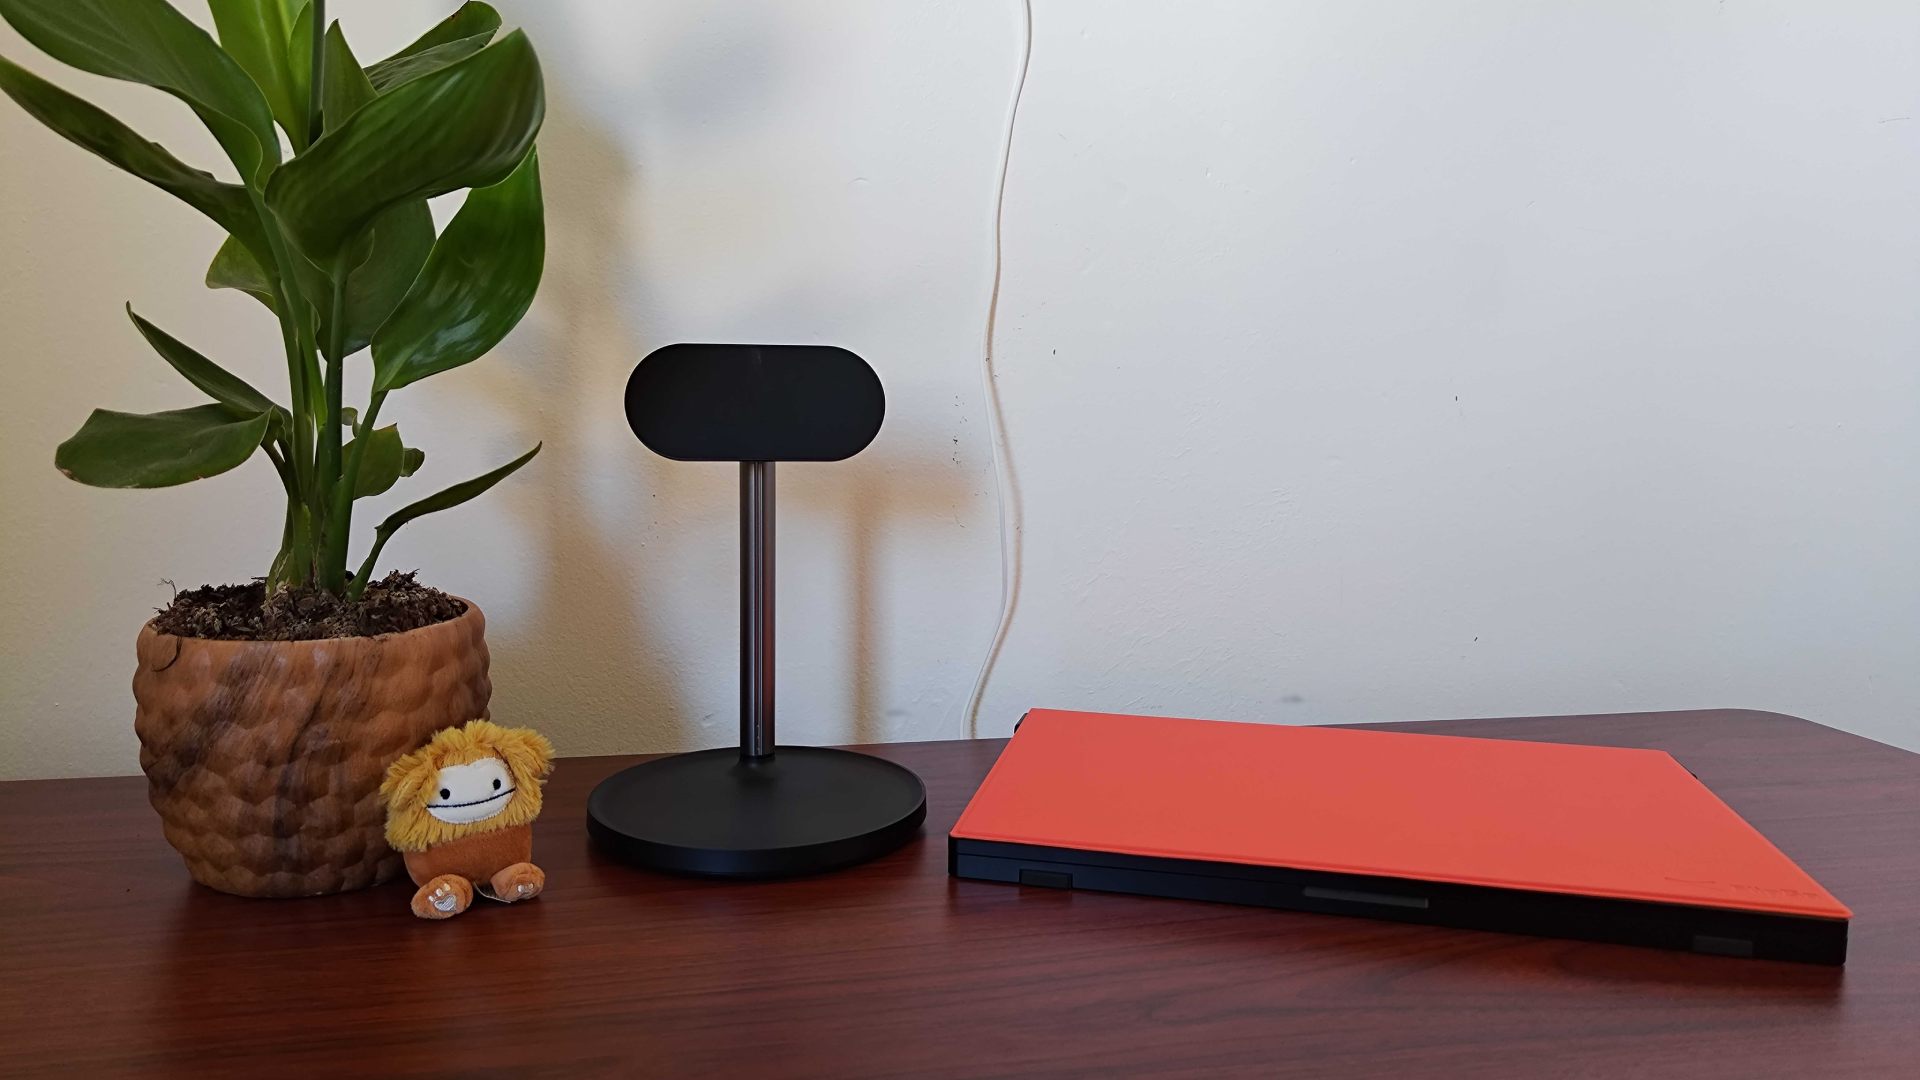 Jsaux FlipGo sitting on desk next to optional magnetic stand and plant